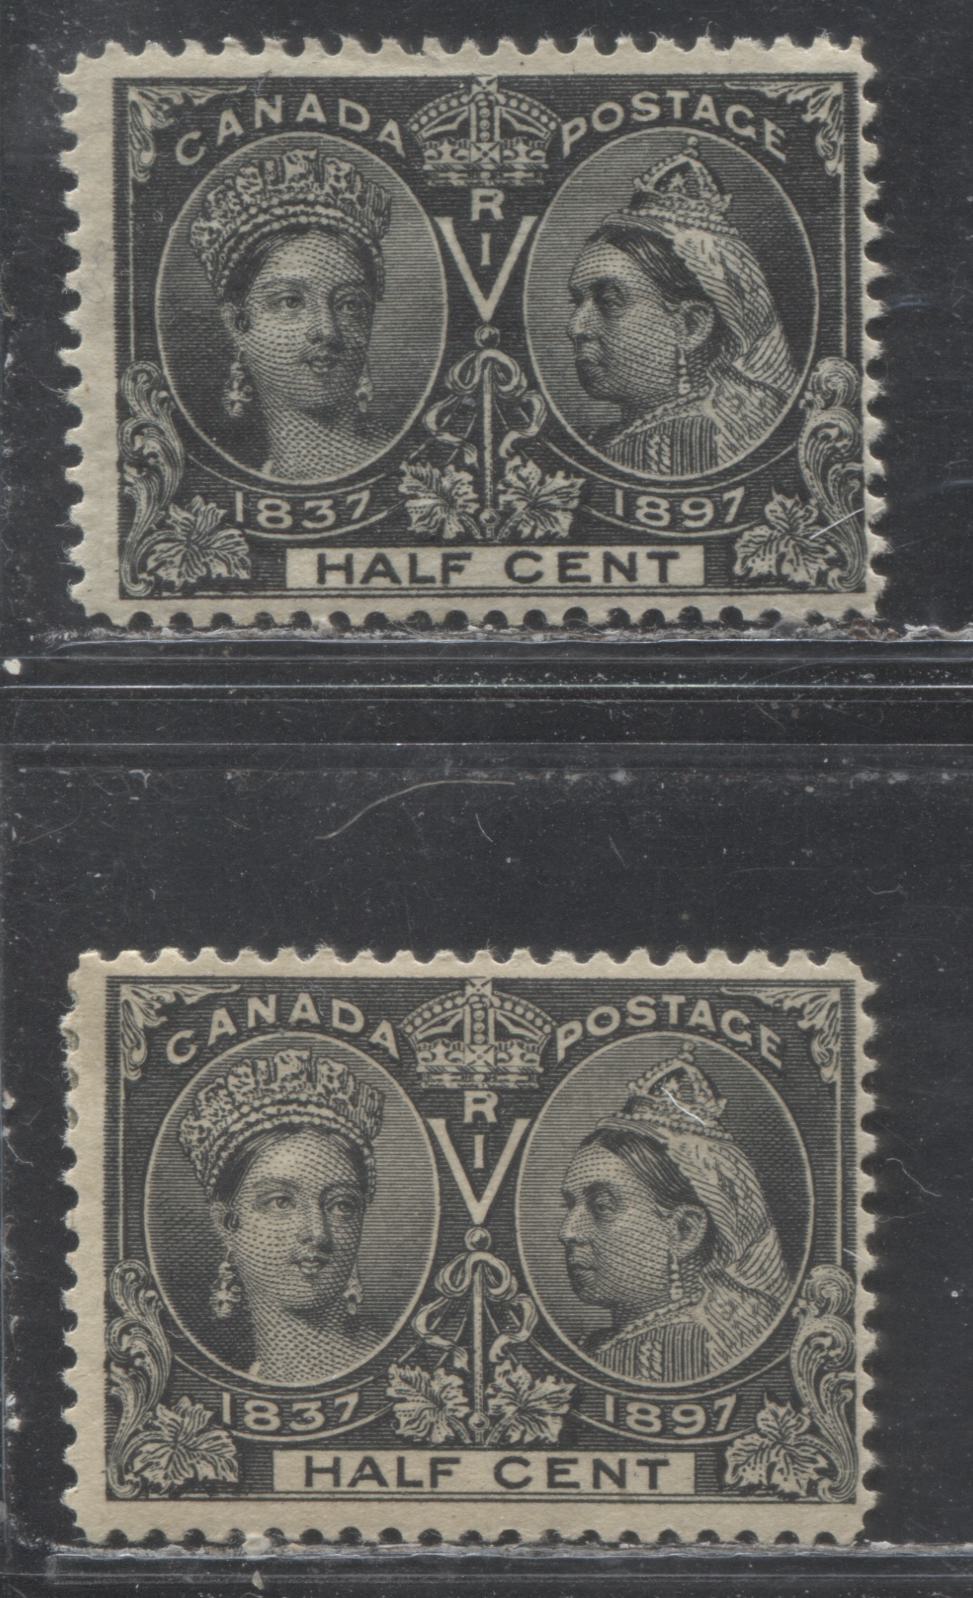 Lot 155 Canada # 50 1/2c Jet Black and Grey Black Queen Victoria, 1897 Diamond Jubilee Issue, Two Fine OG Examples of Both Shades on White and Toned Paper